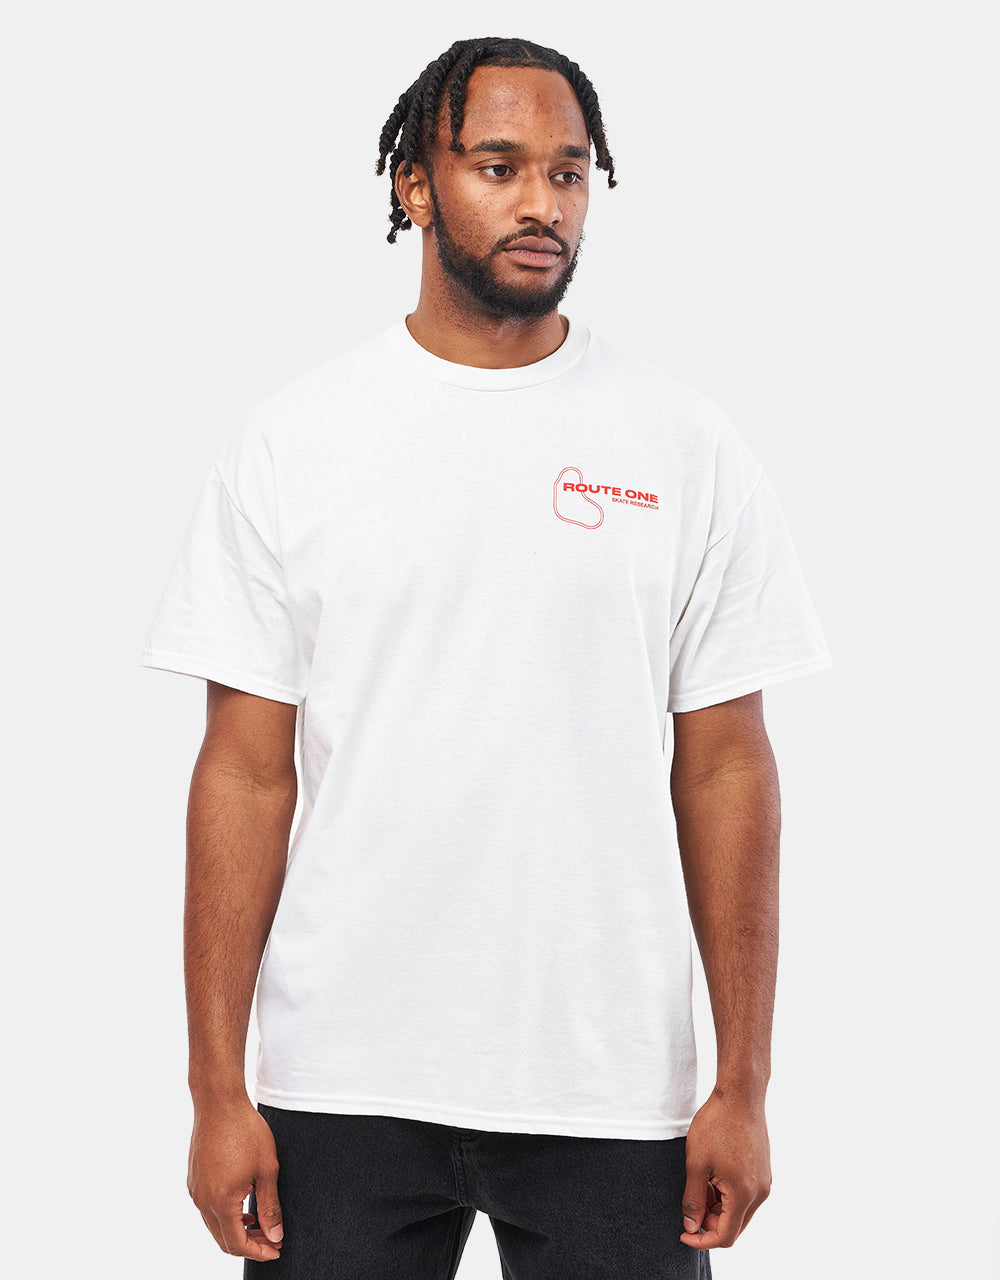 Route One Aalto T-Shirt - White